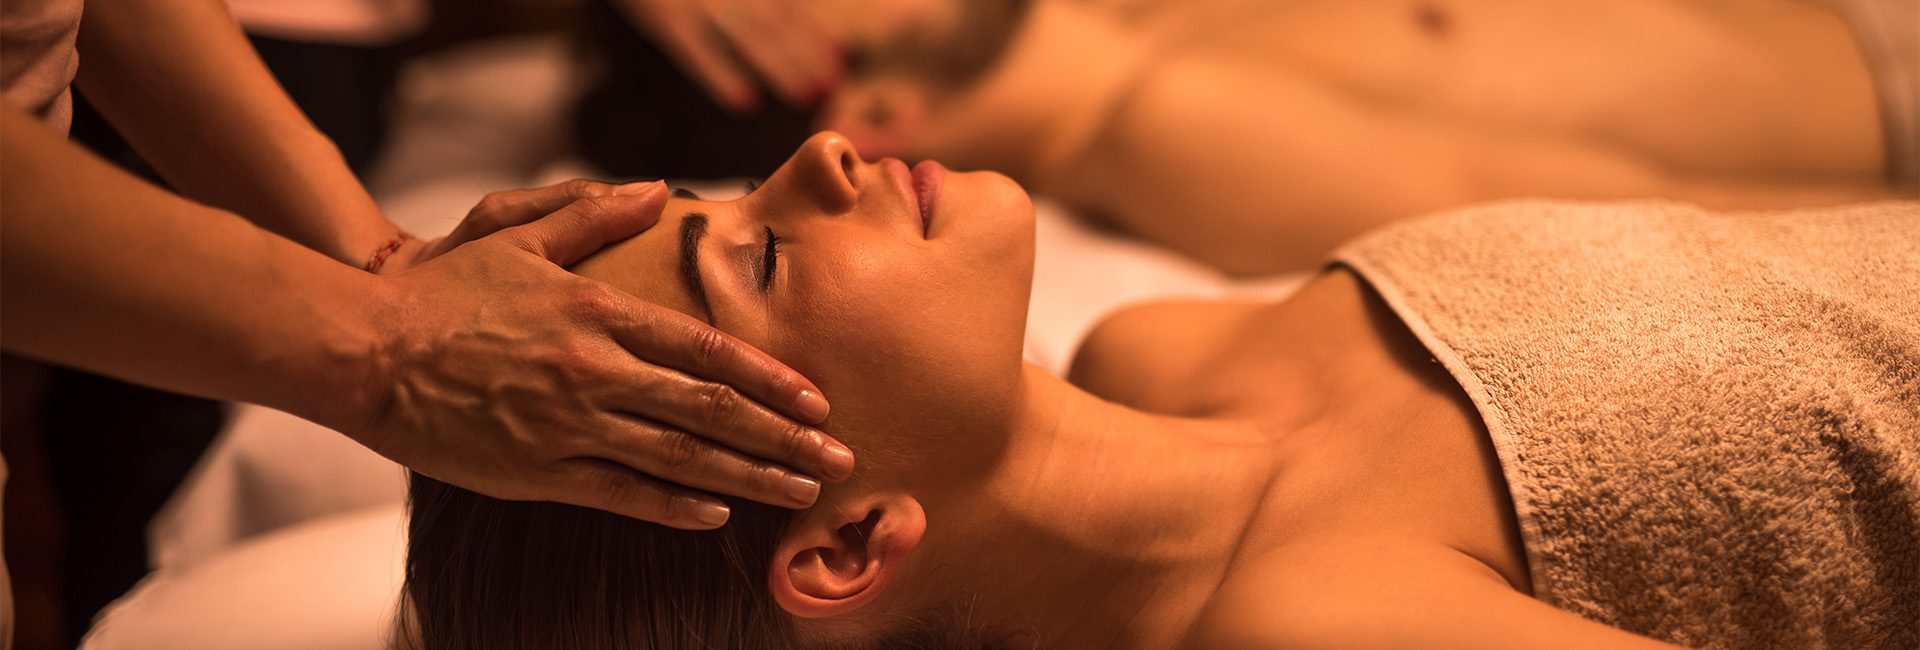 Best Massage Therapy Services Near Me Post Falls